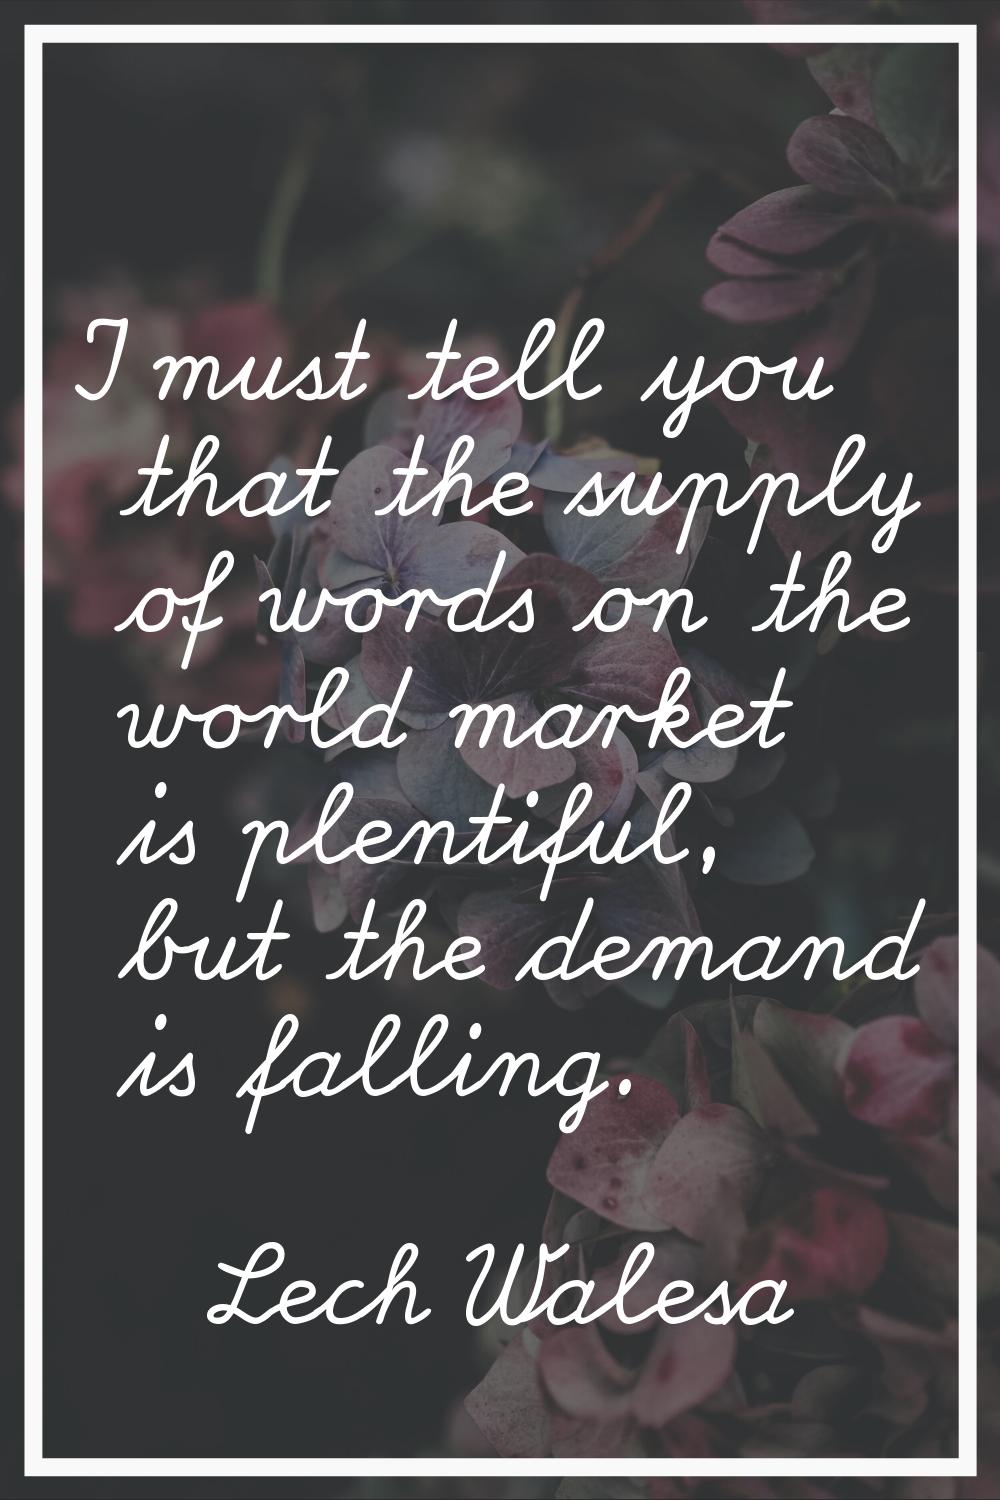 I must tell you that the supply of words on the world market is plentiful, but the demand is fallin